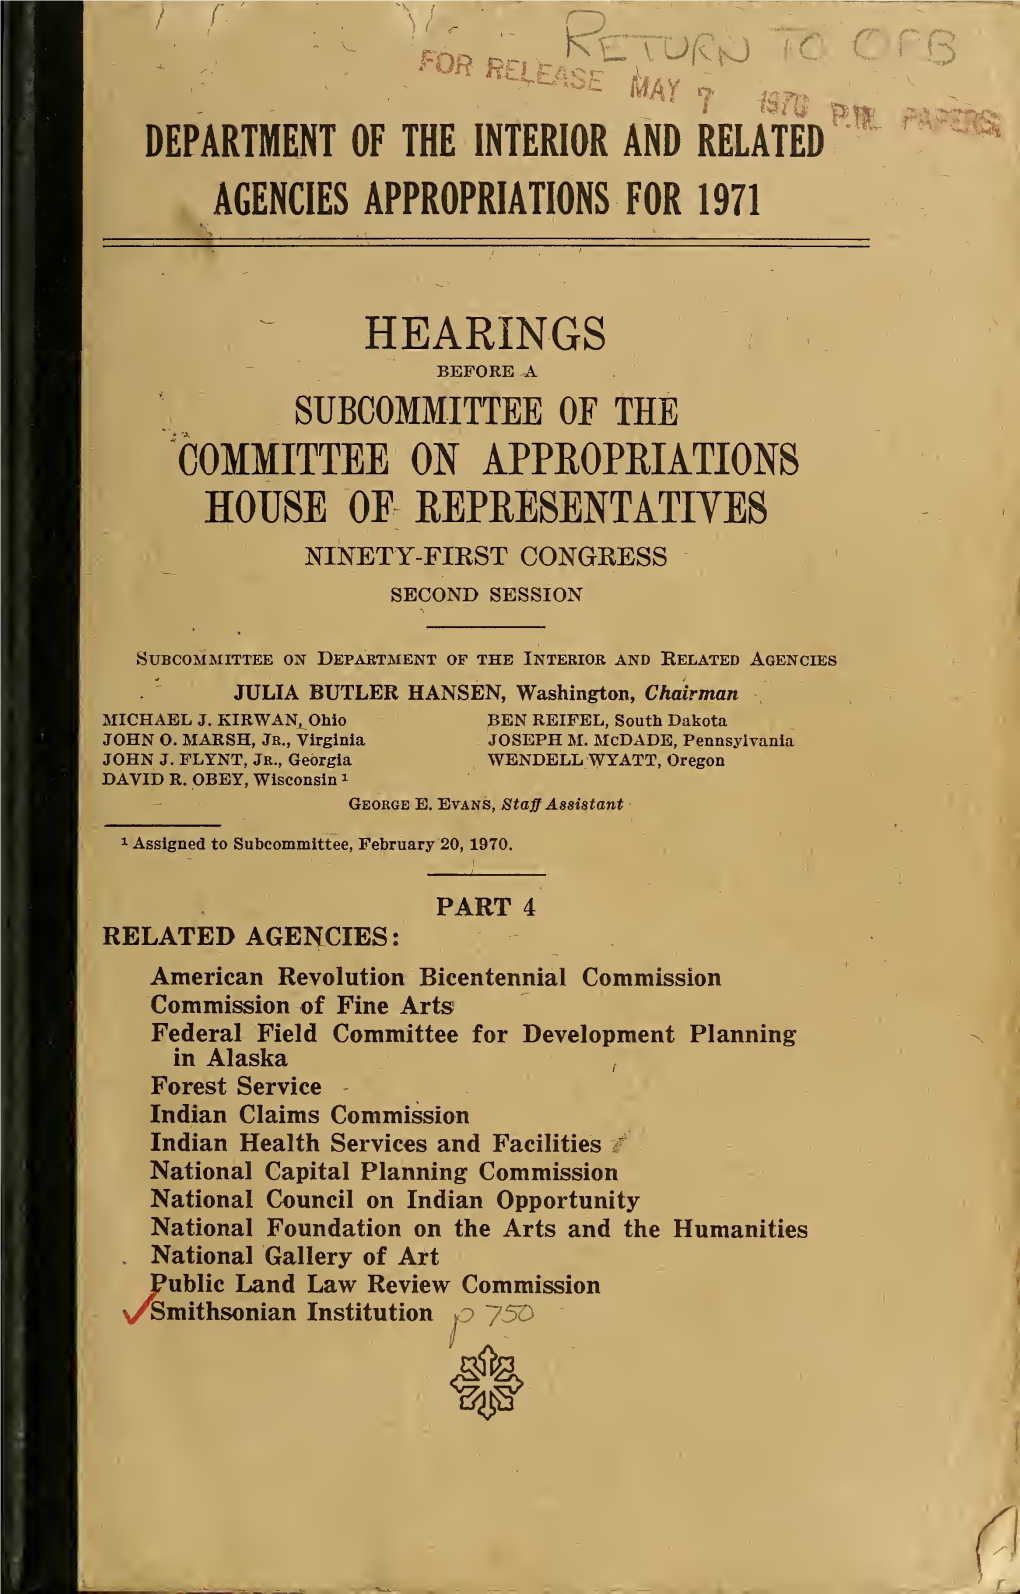 [Smithsonian Institution Appropriations Hearings]